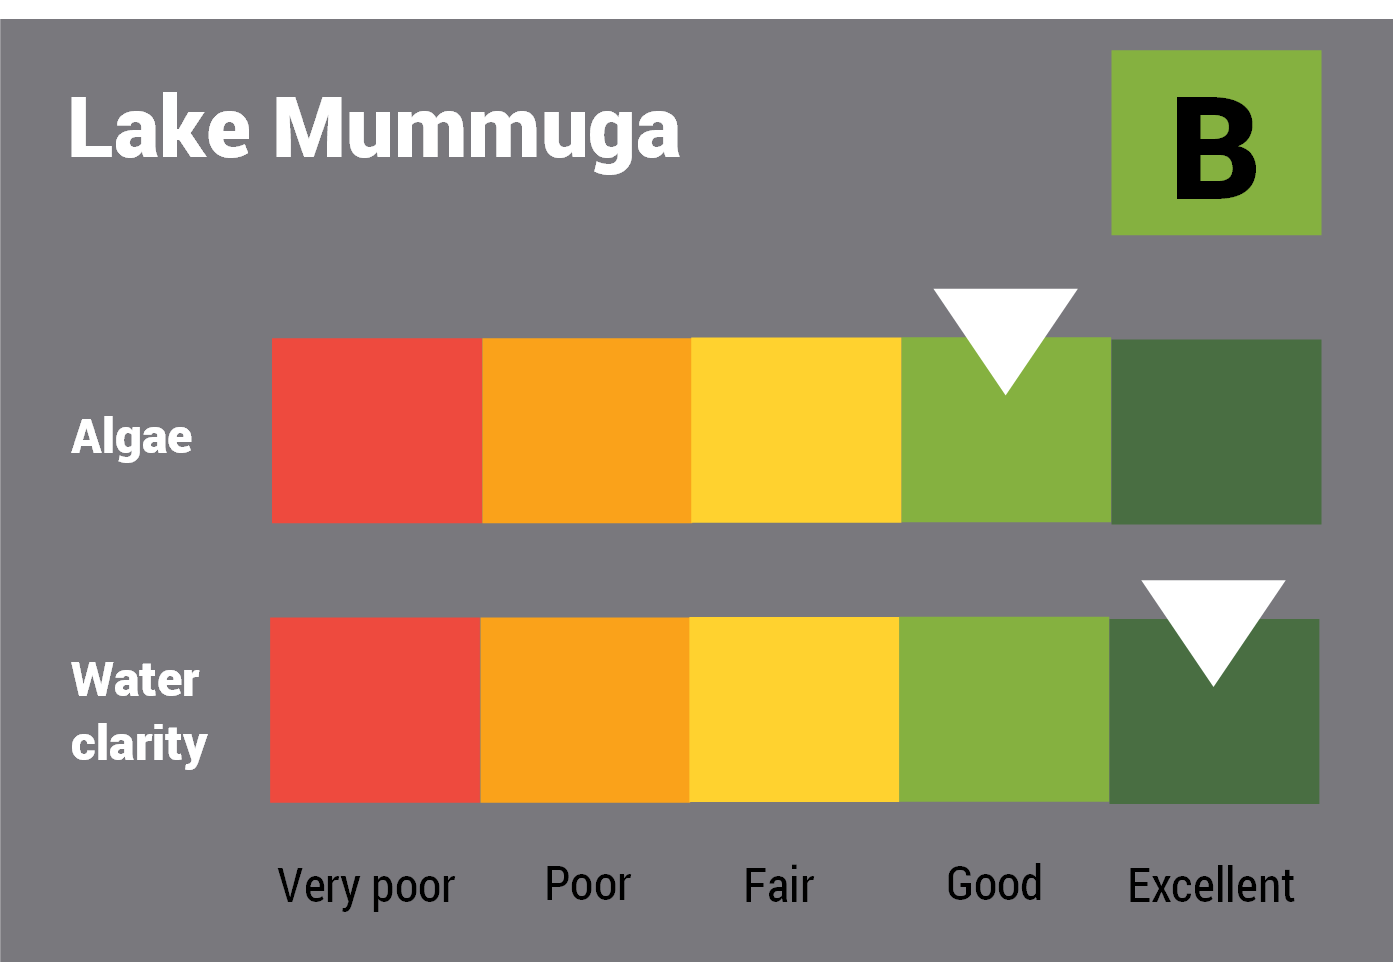 Lake Mummuga water quality report card for algae and water clarity showing colour-coded ratings (red, orange, yellow, light green and dark green, which represent very poor, poor, fair, good and excellent, respectively). Algae is rated 'excellent' and water clarity is rated 'good' giving an overall rating of 'good' or 'B'.